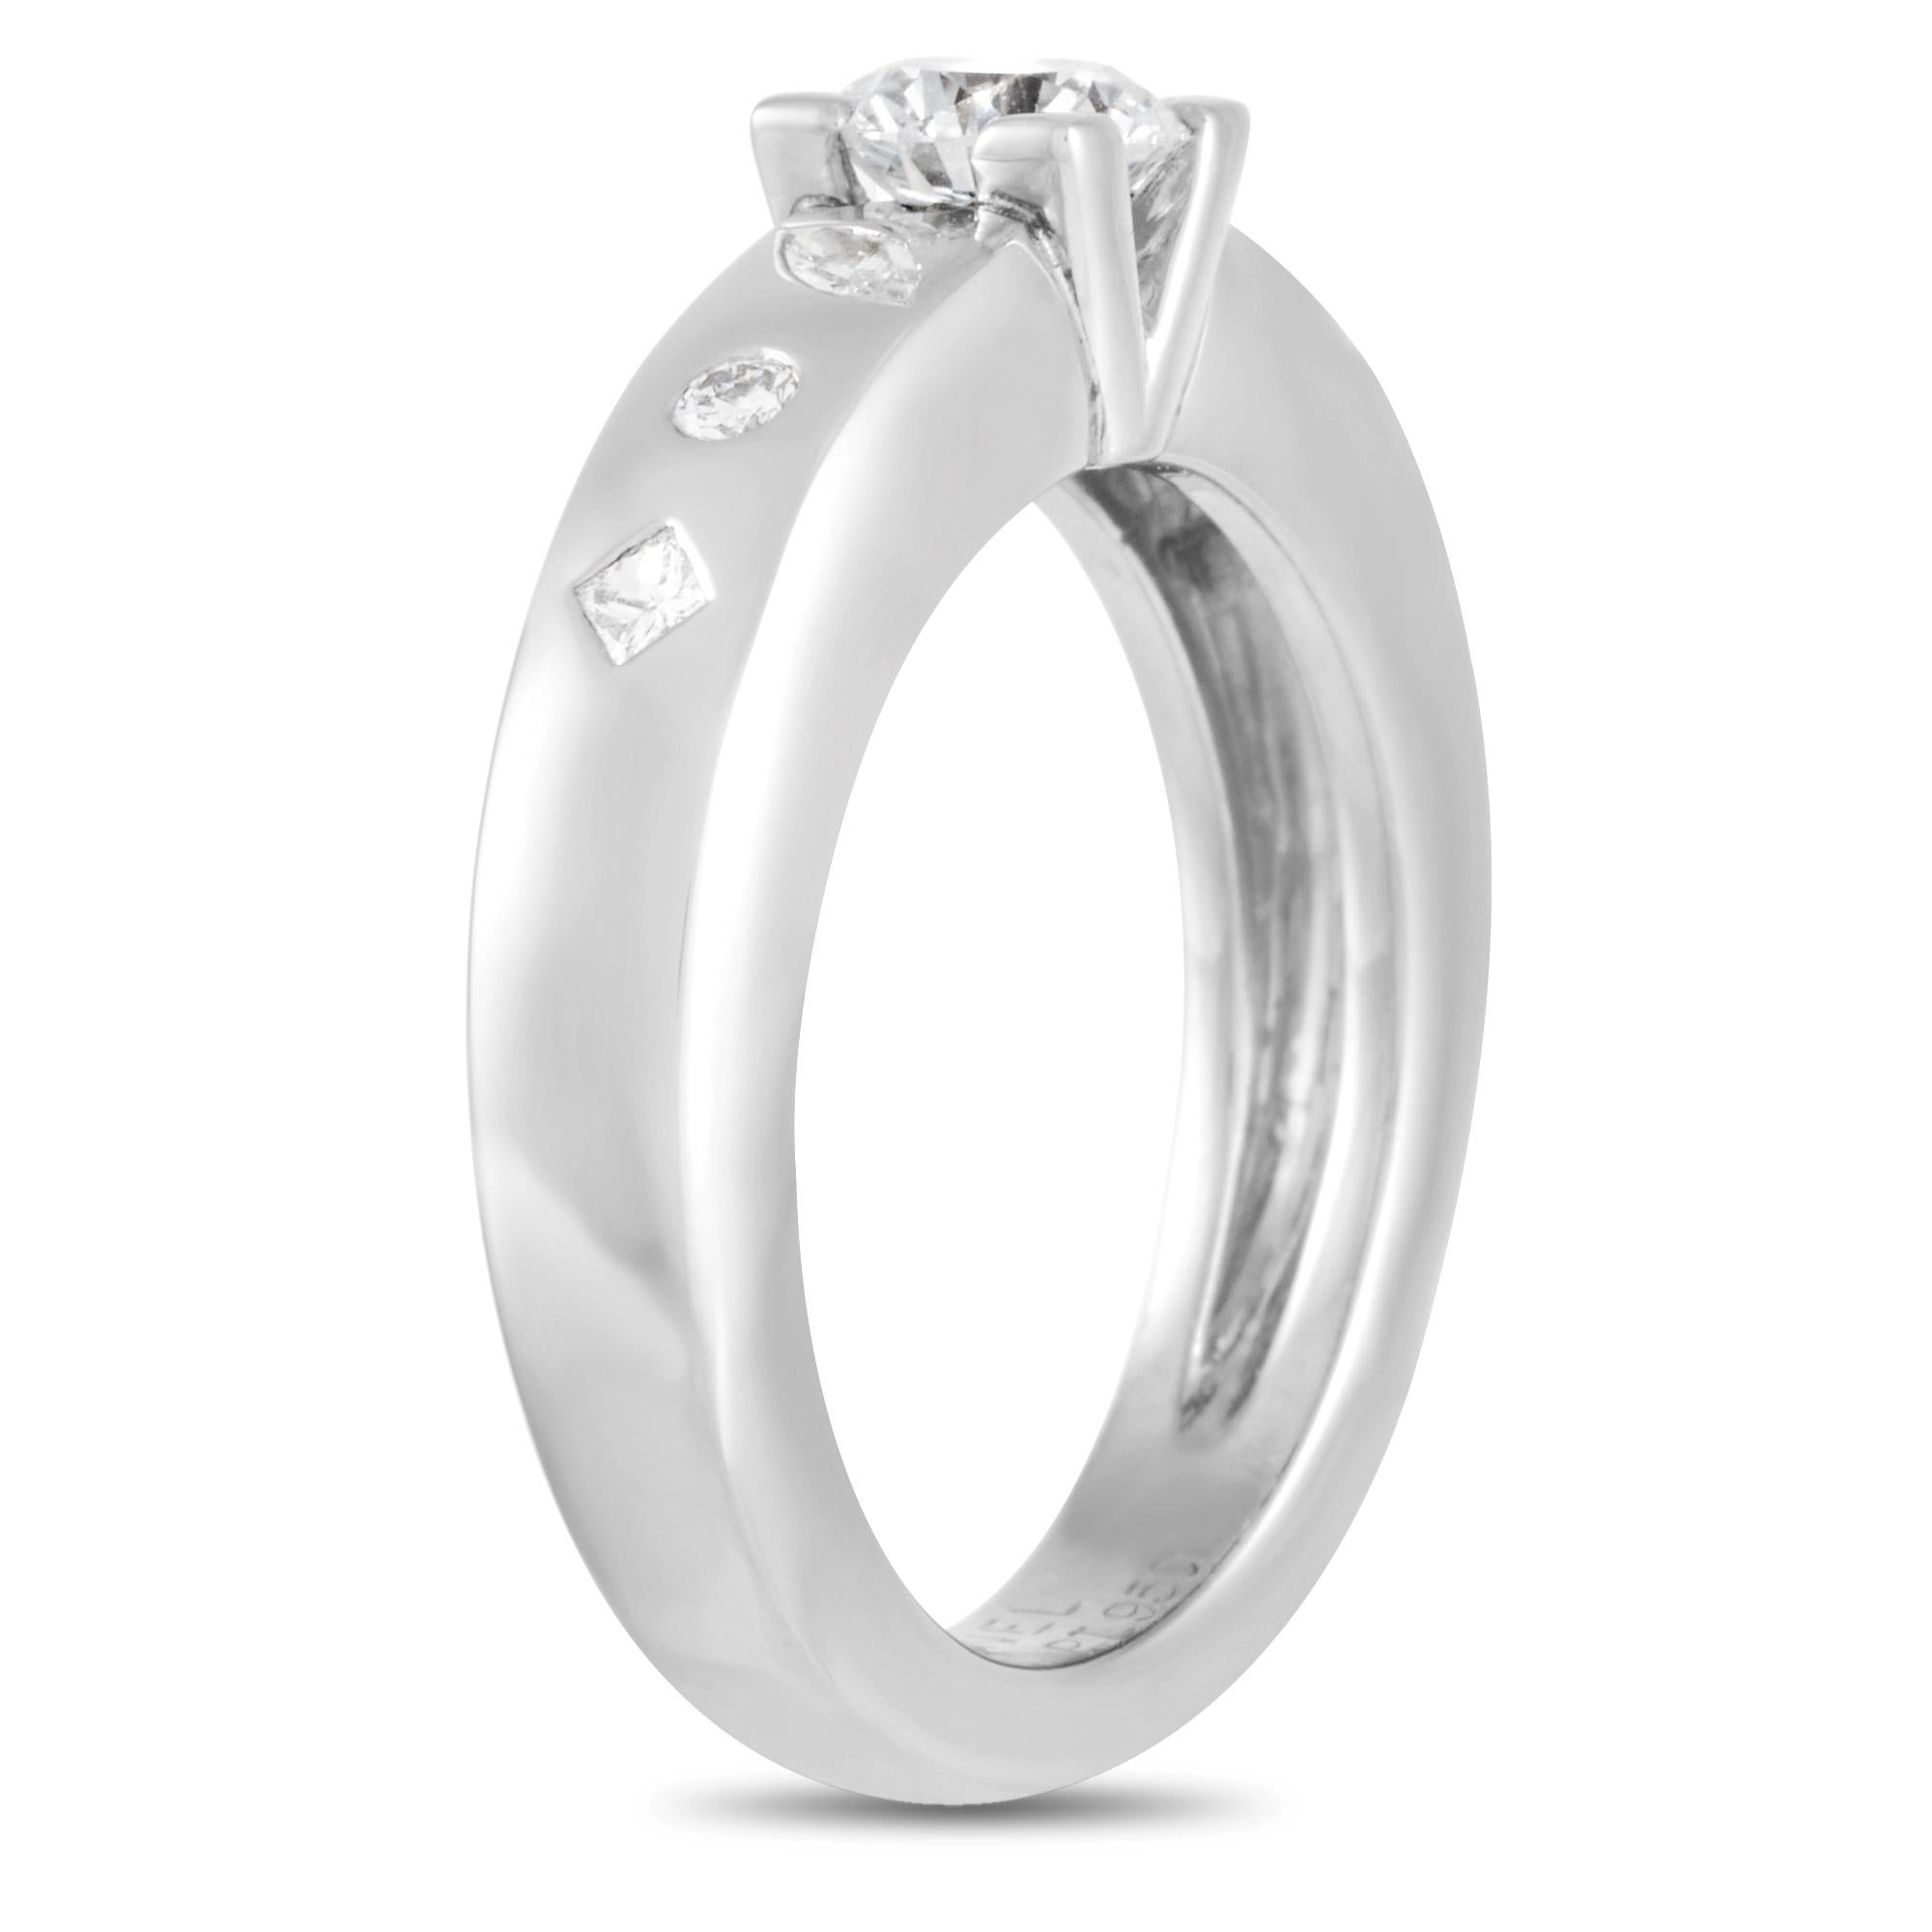 Charm your way to her heart with this Chanel Platinum 0.75 ct Diamond Ring. This one-of-a-kind ring features a smooth platinum body decorated with a 0.55 ct brilliant-cut center stone. On the 3mm shank's sides are 0.20 carat total weight of diamonds